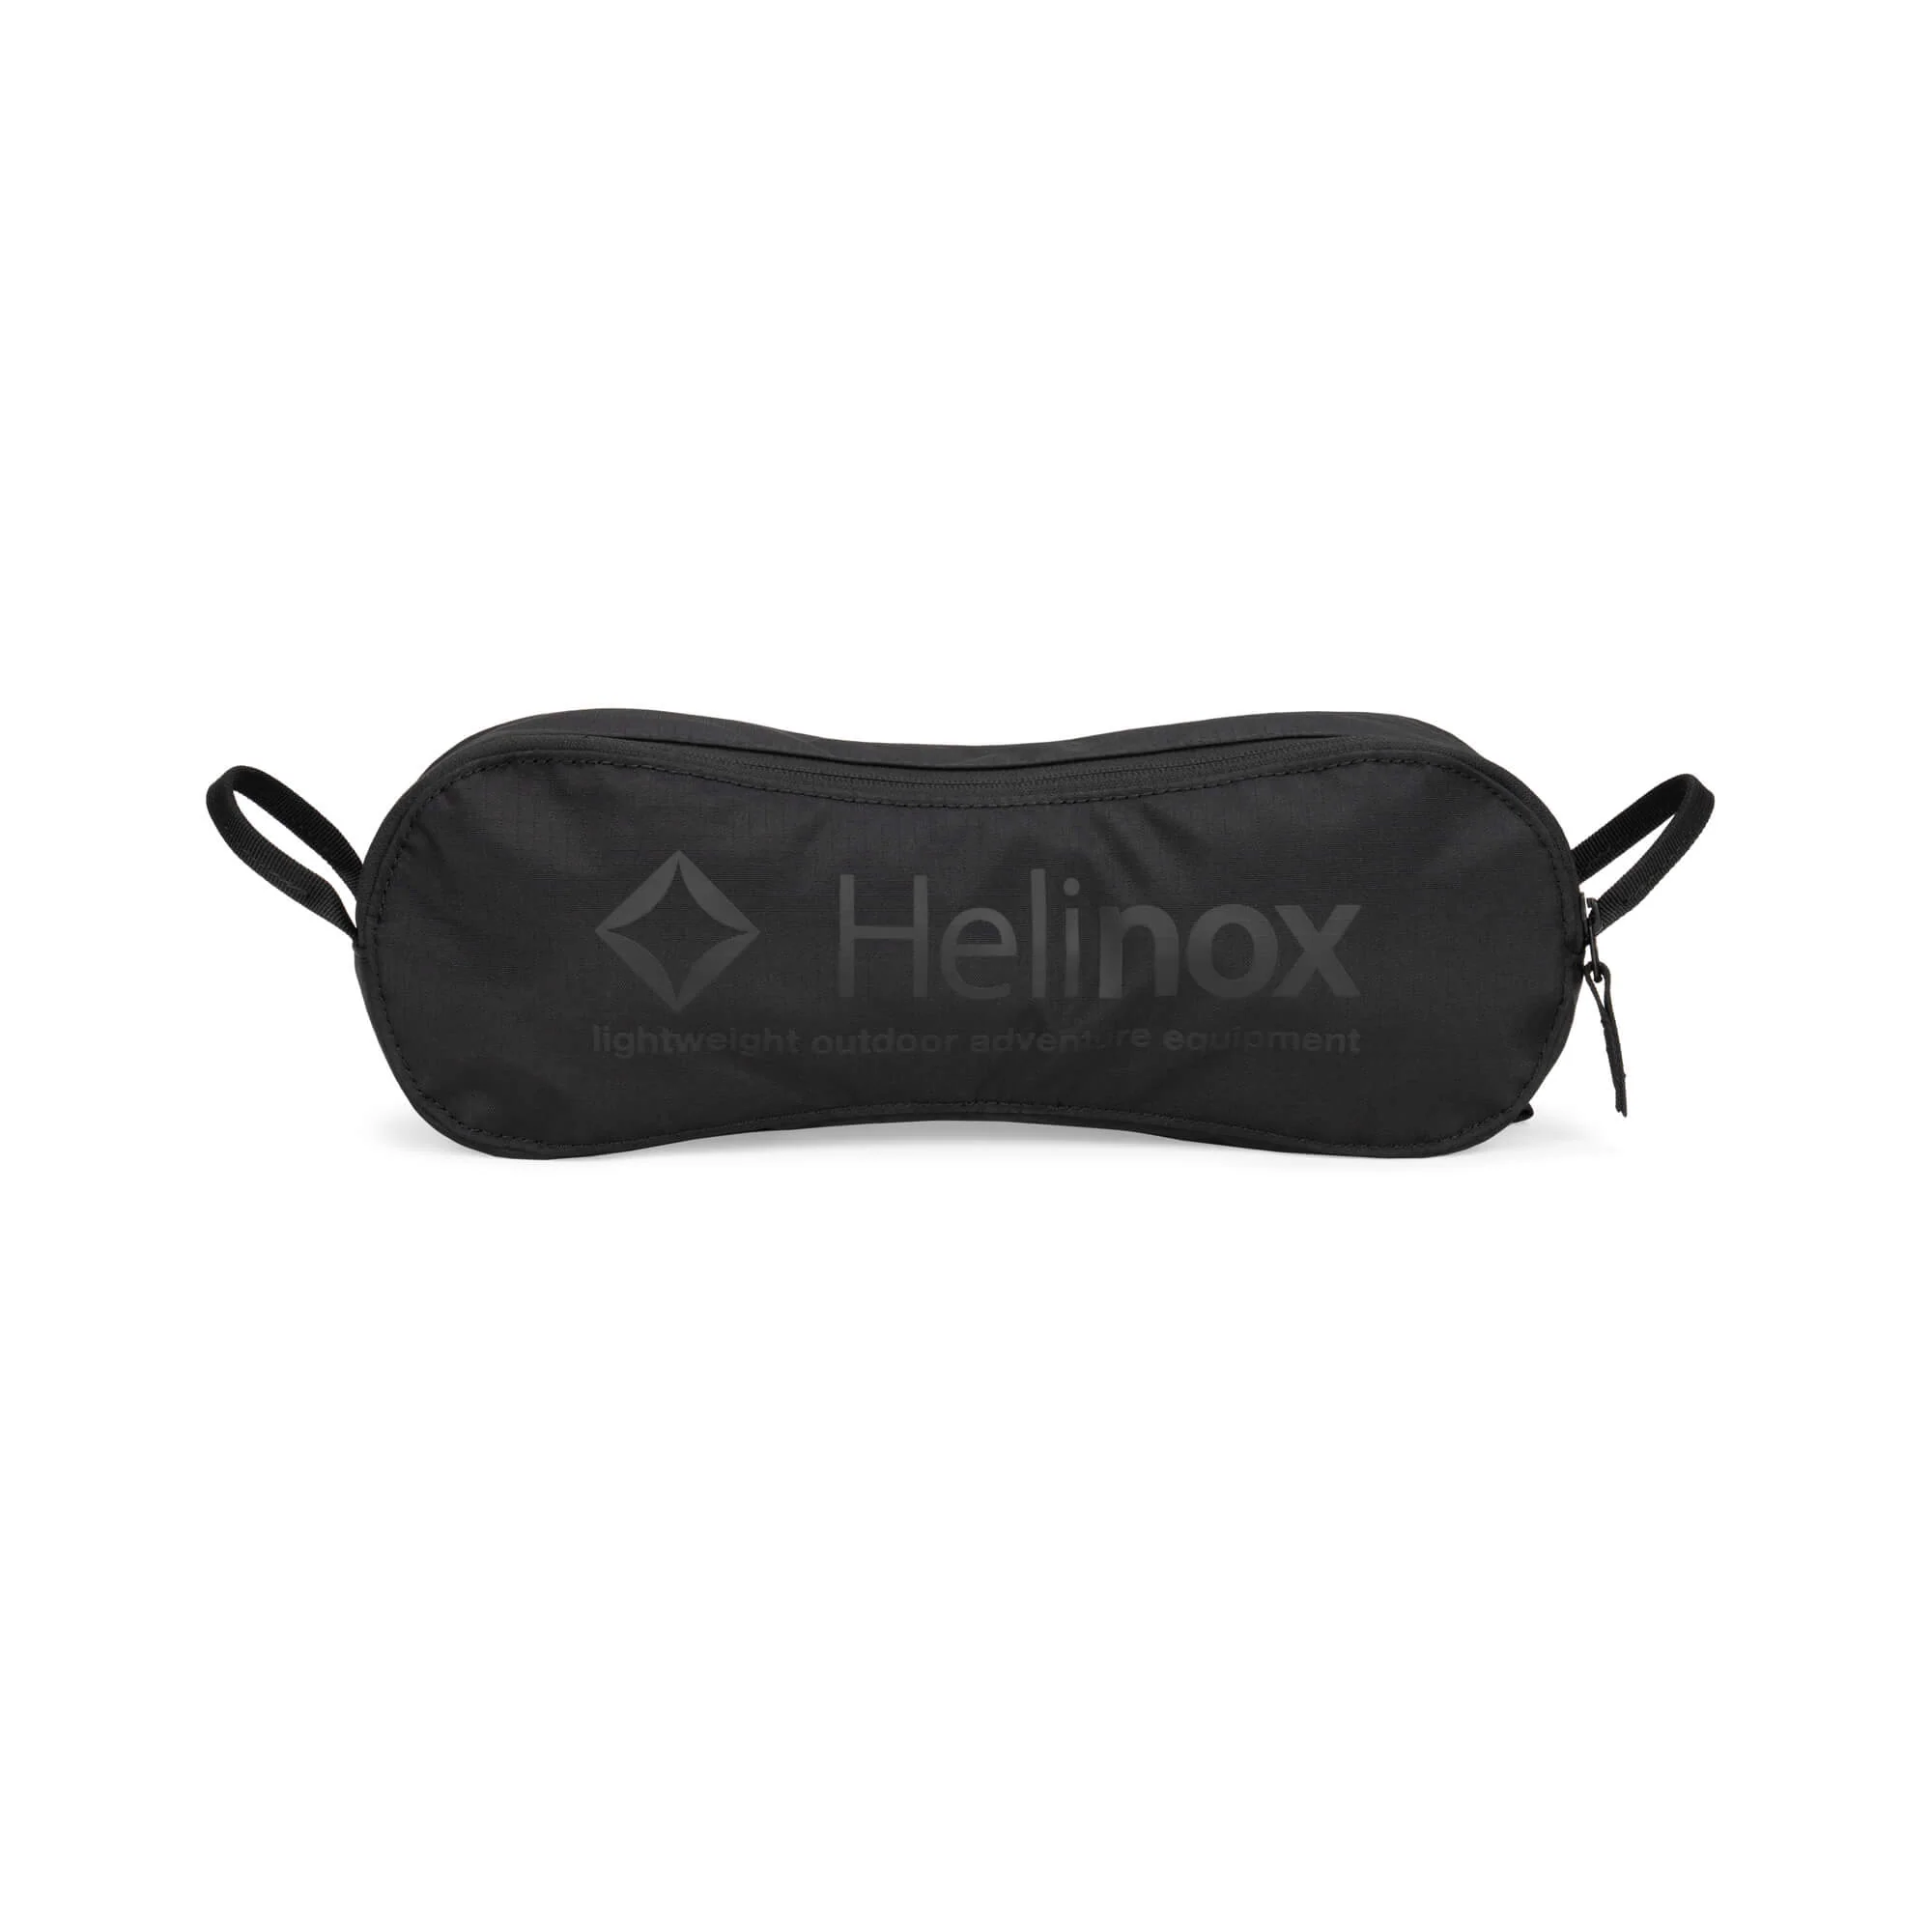 Helinox "Chair One" - blackout Edition